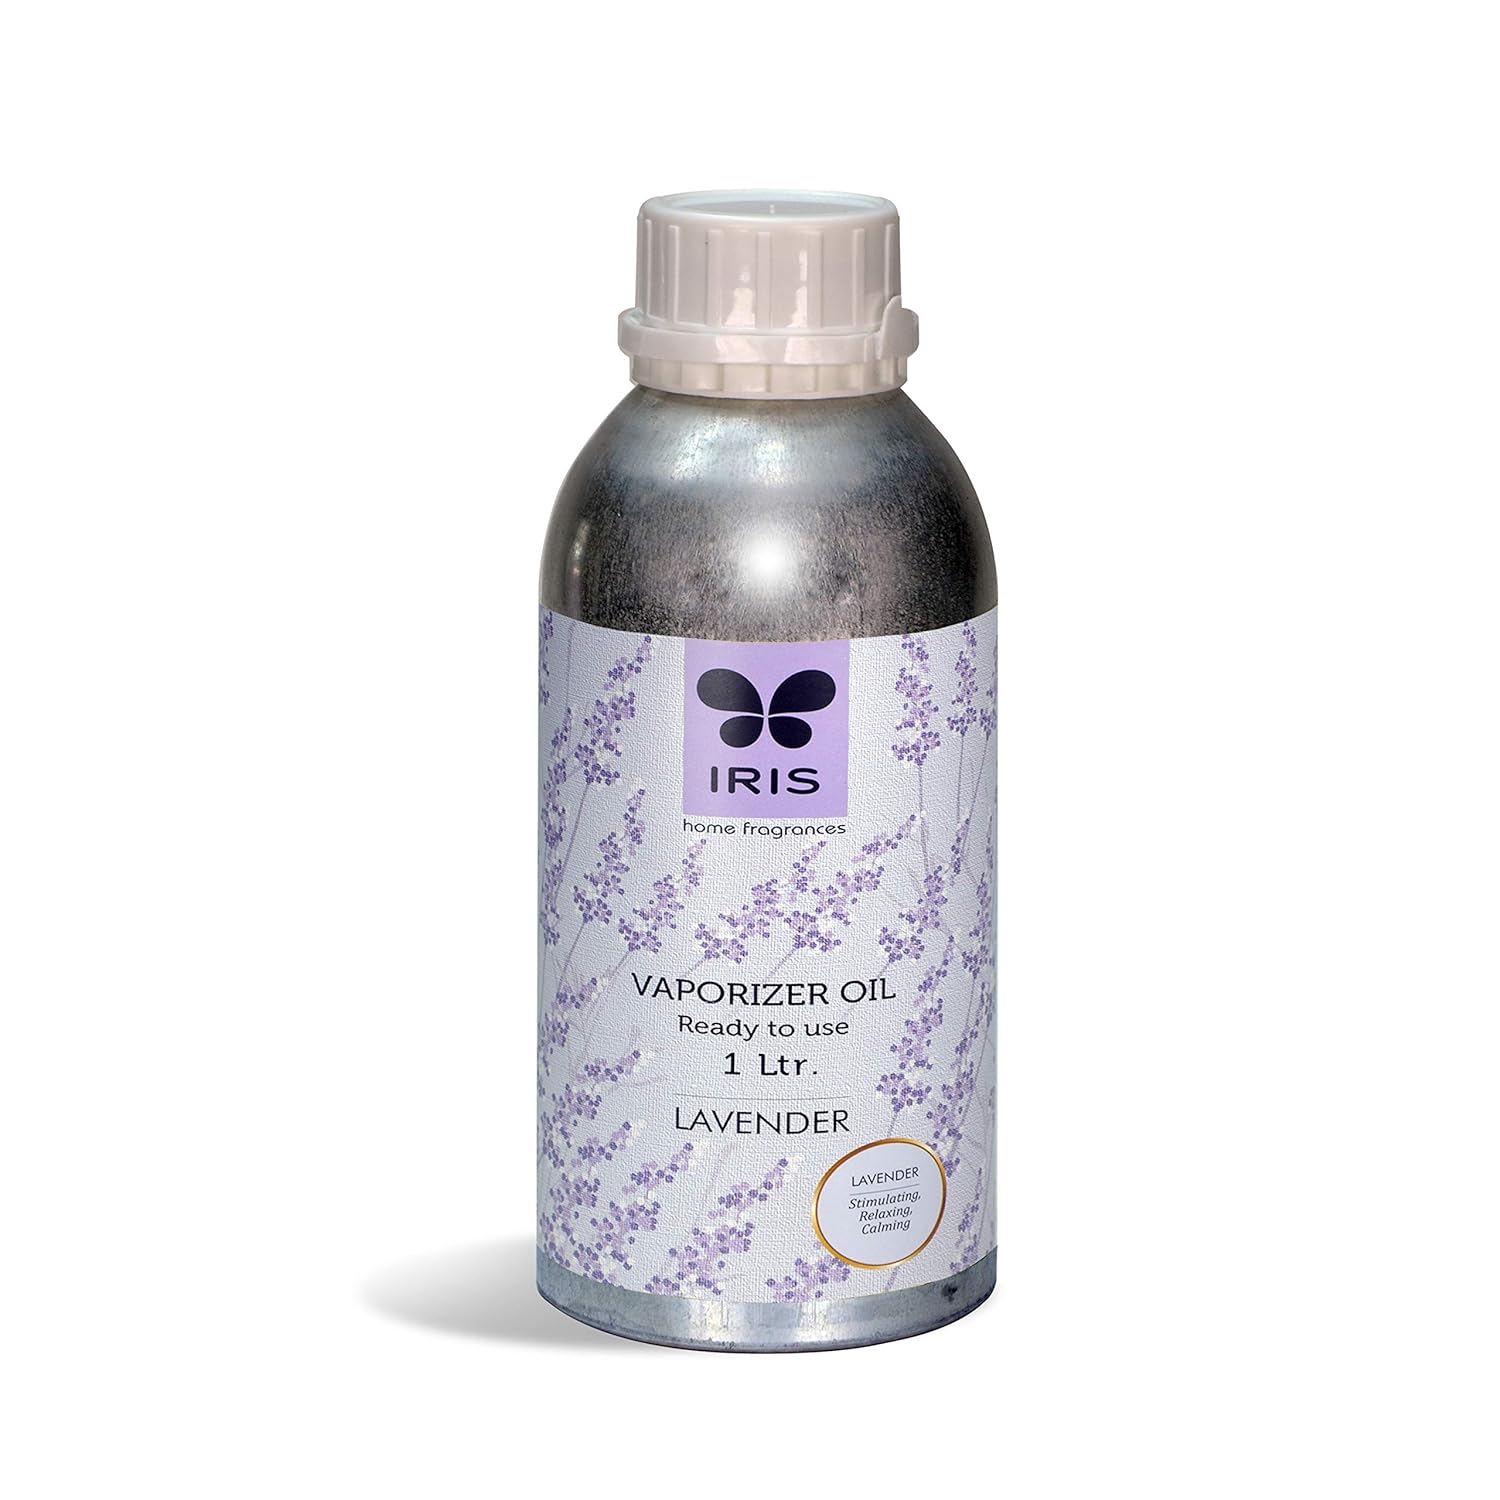 Cycle  IRIS  Lavender Fragrance1 ltr ready to use  Vaporizer Oil in a aluminium can